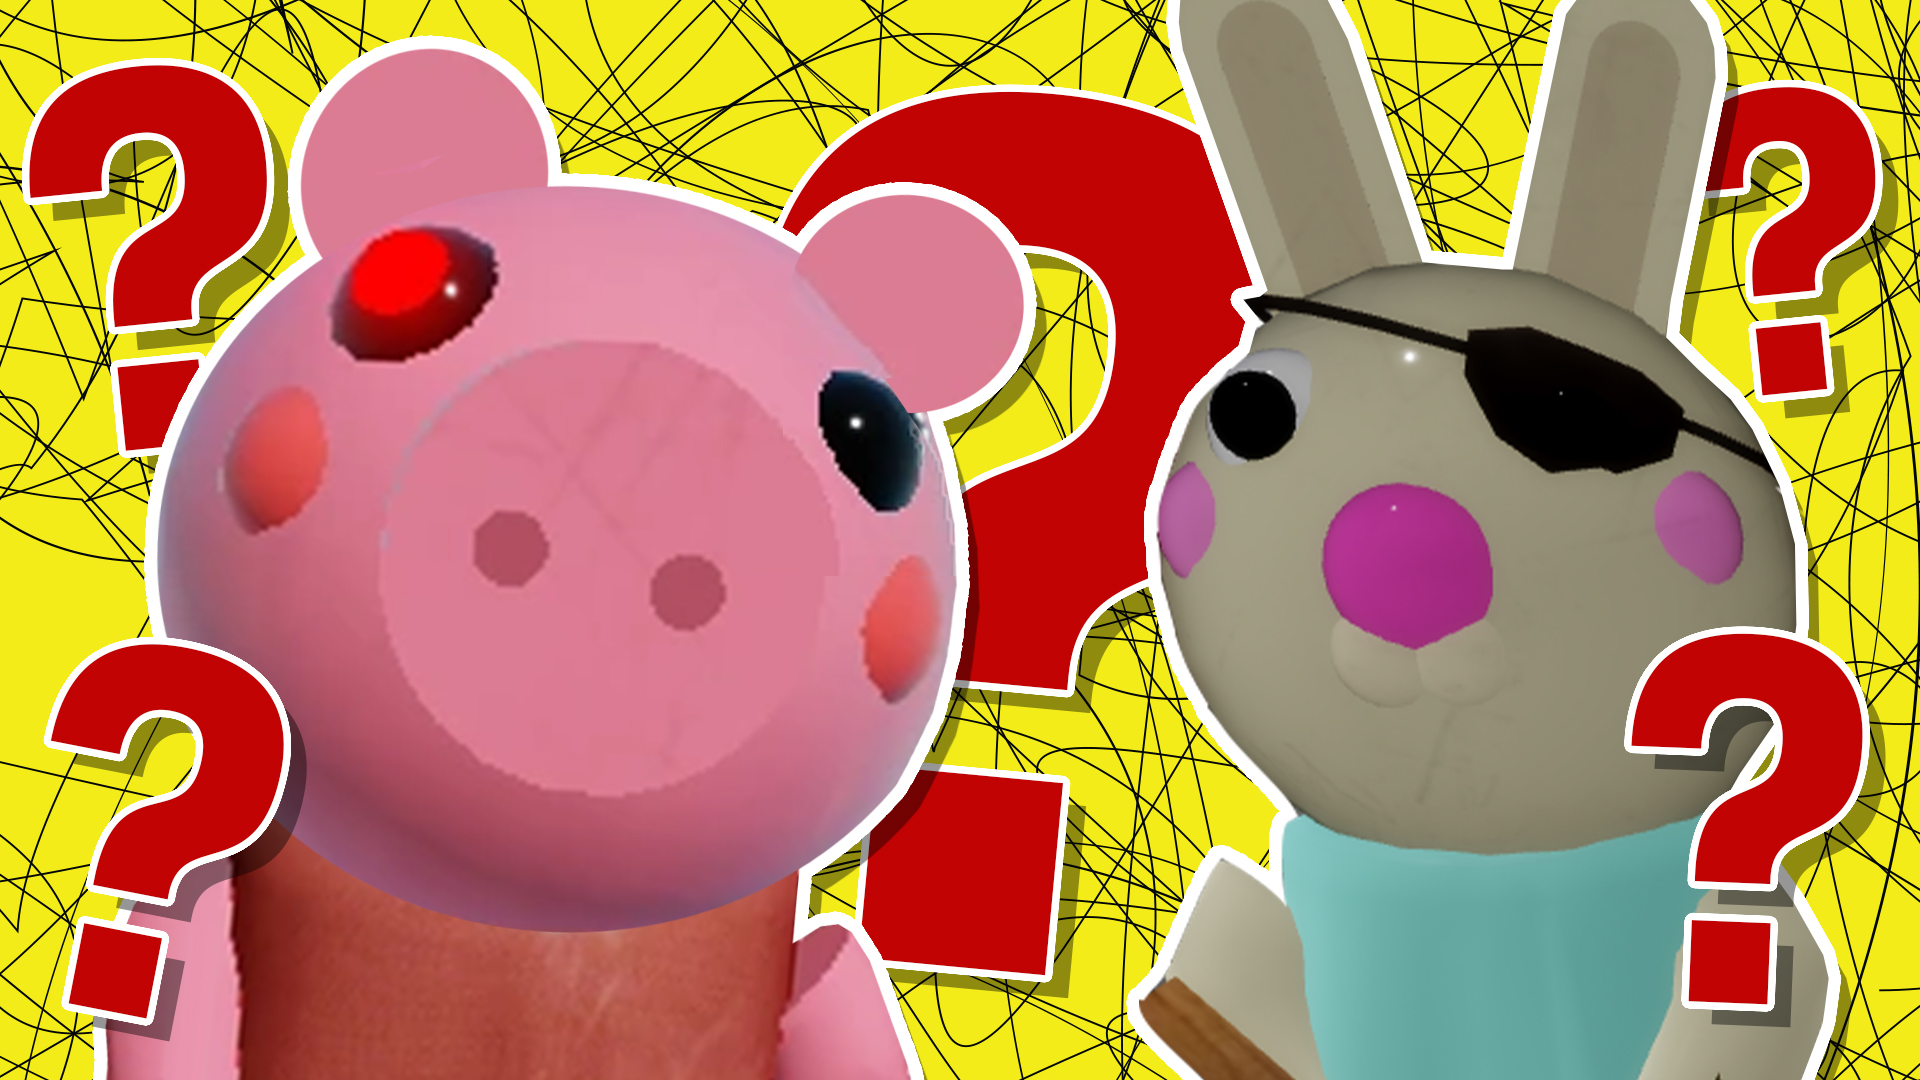 Which Adopt Me Pet Are You? Roblox Personality Test 